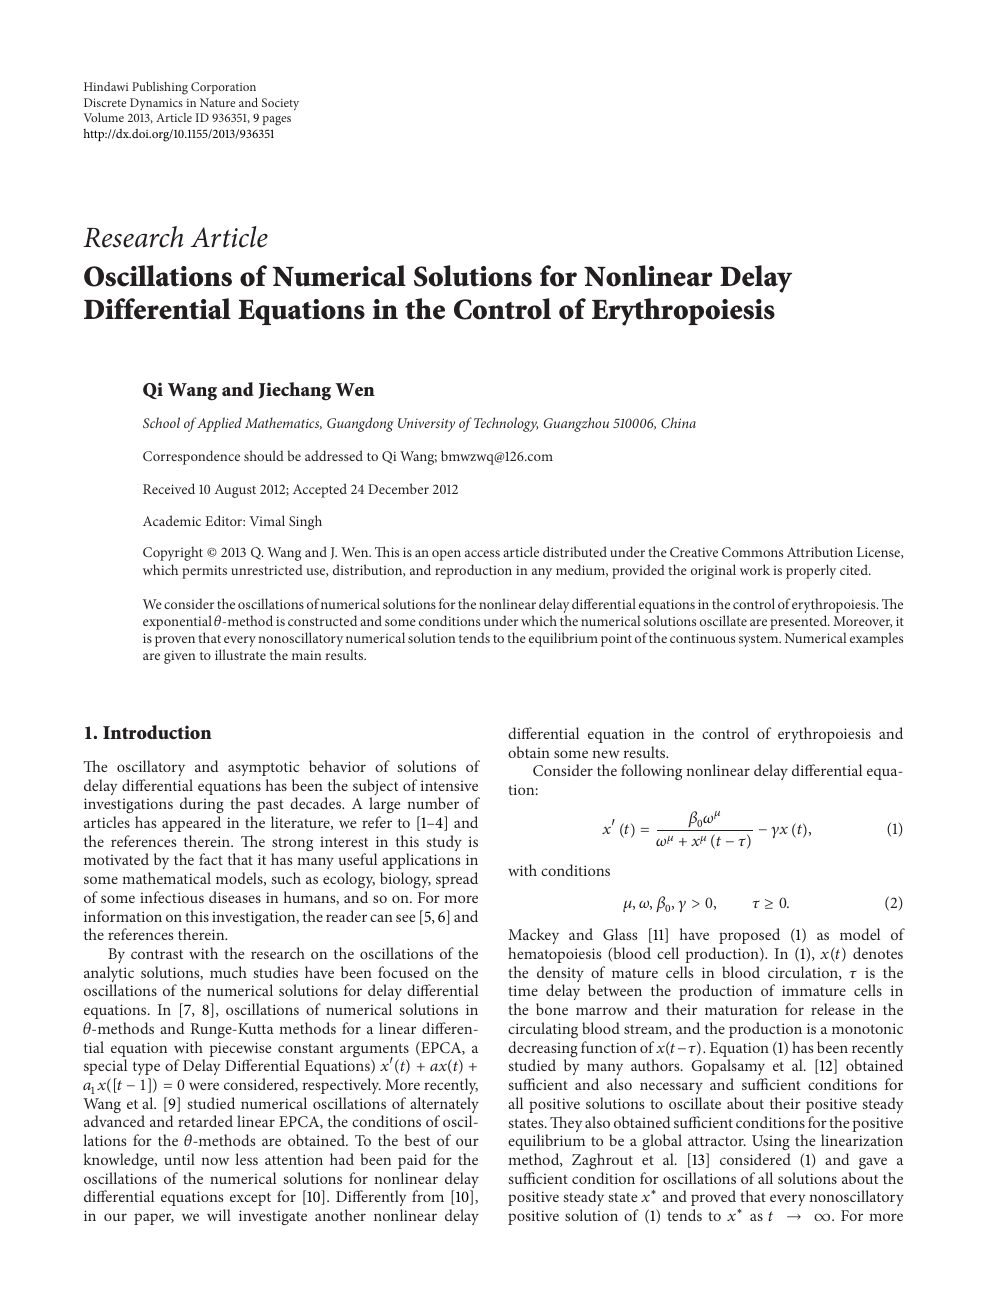 Oscillations Of Numerical Solutions For Nonlinear Delay Differential Equations In The Control Of Erythropoiesis Topic Of Research Paper In Mathematics Download Scholarly Article Pdf And Read For Free On Cyberleninka Open